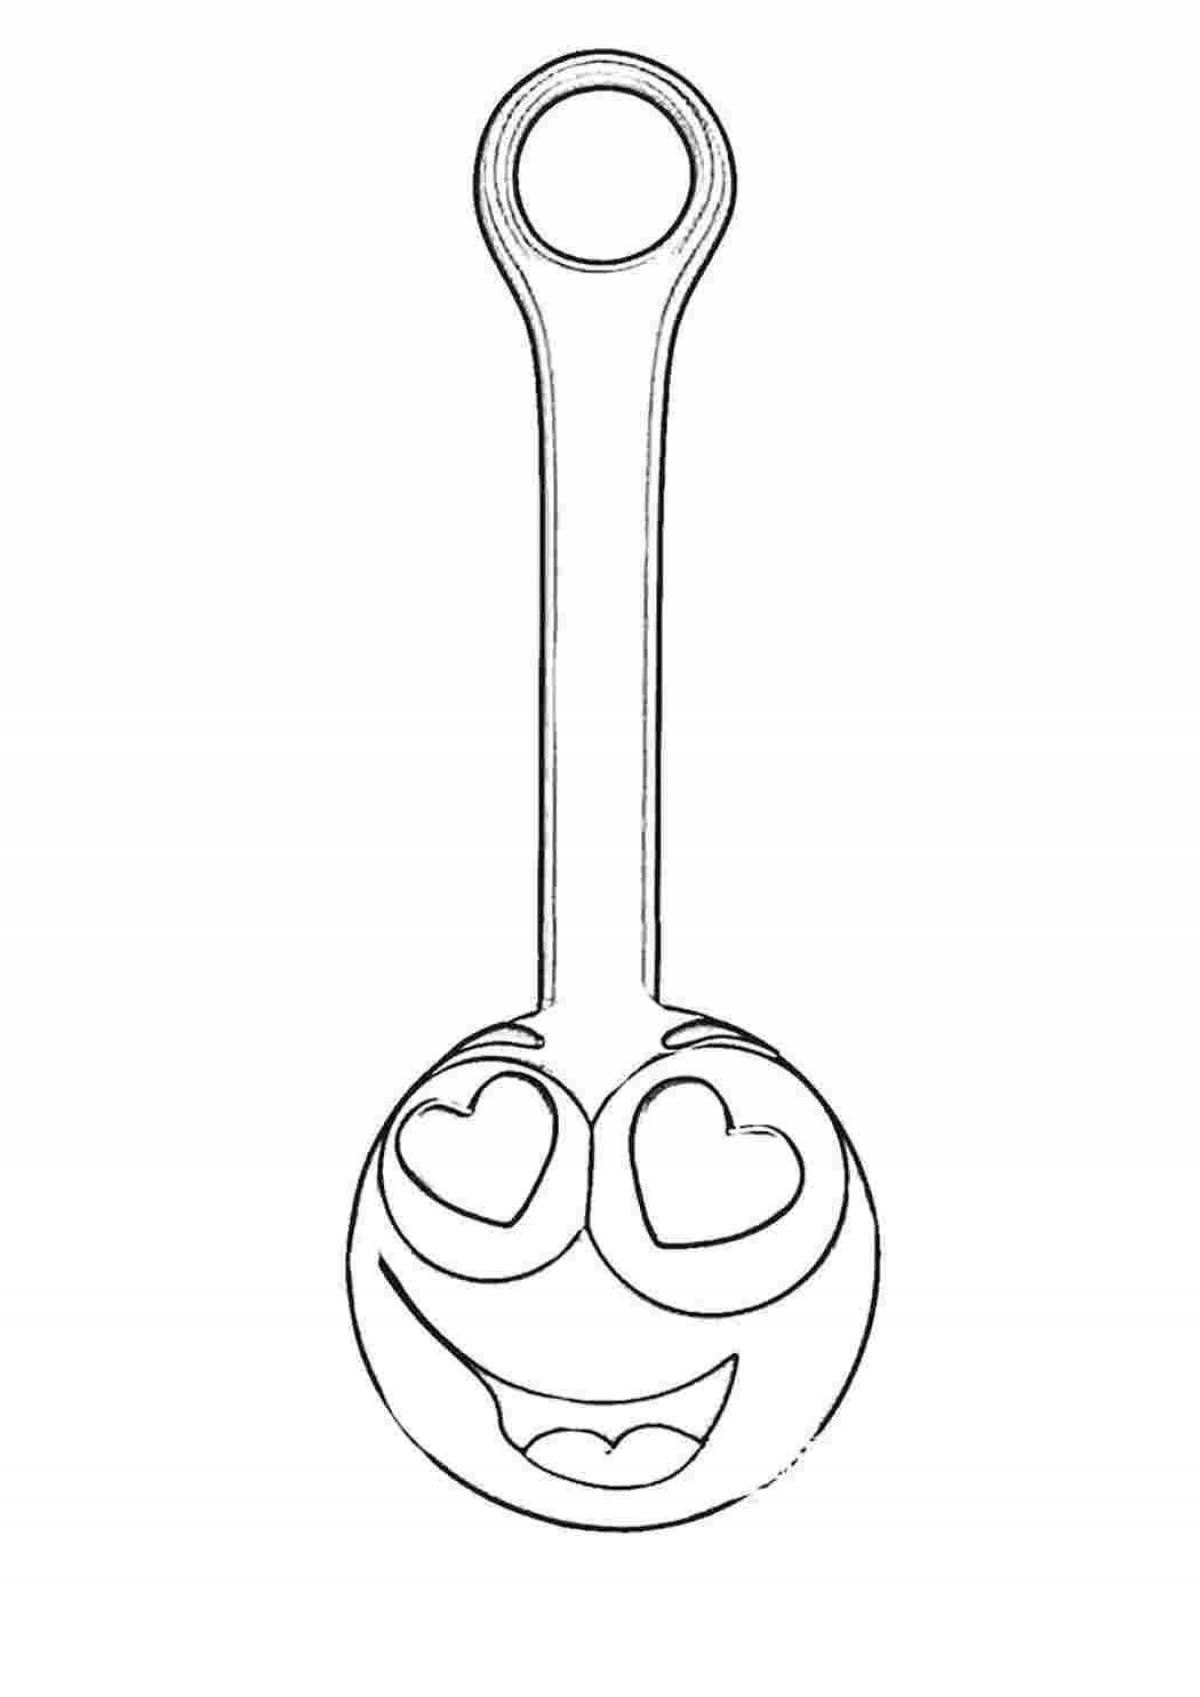 Fascinating fasteners coloring page